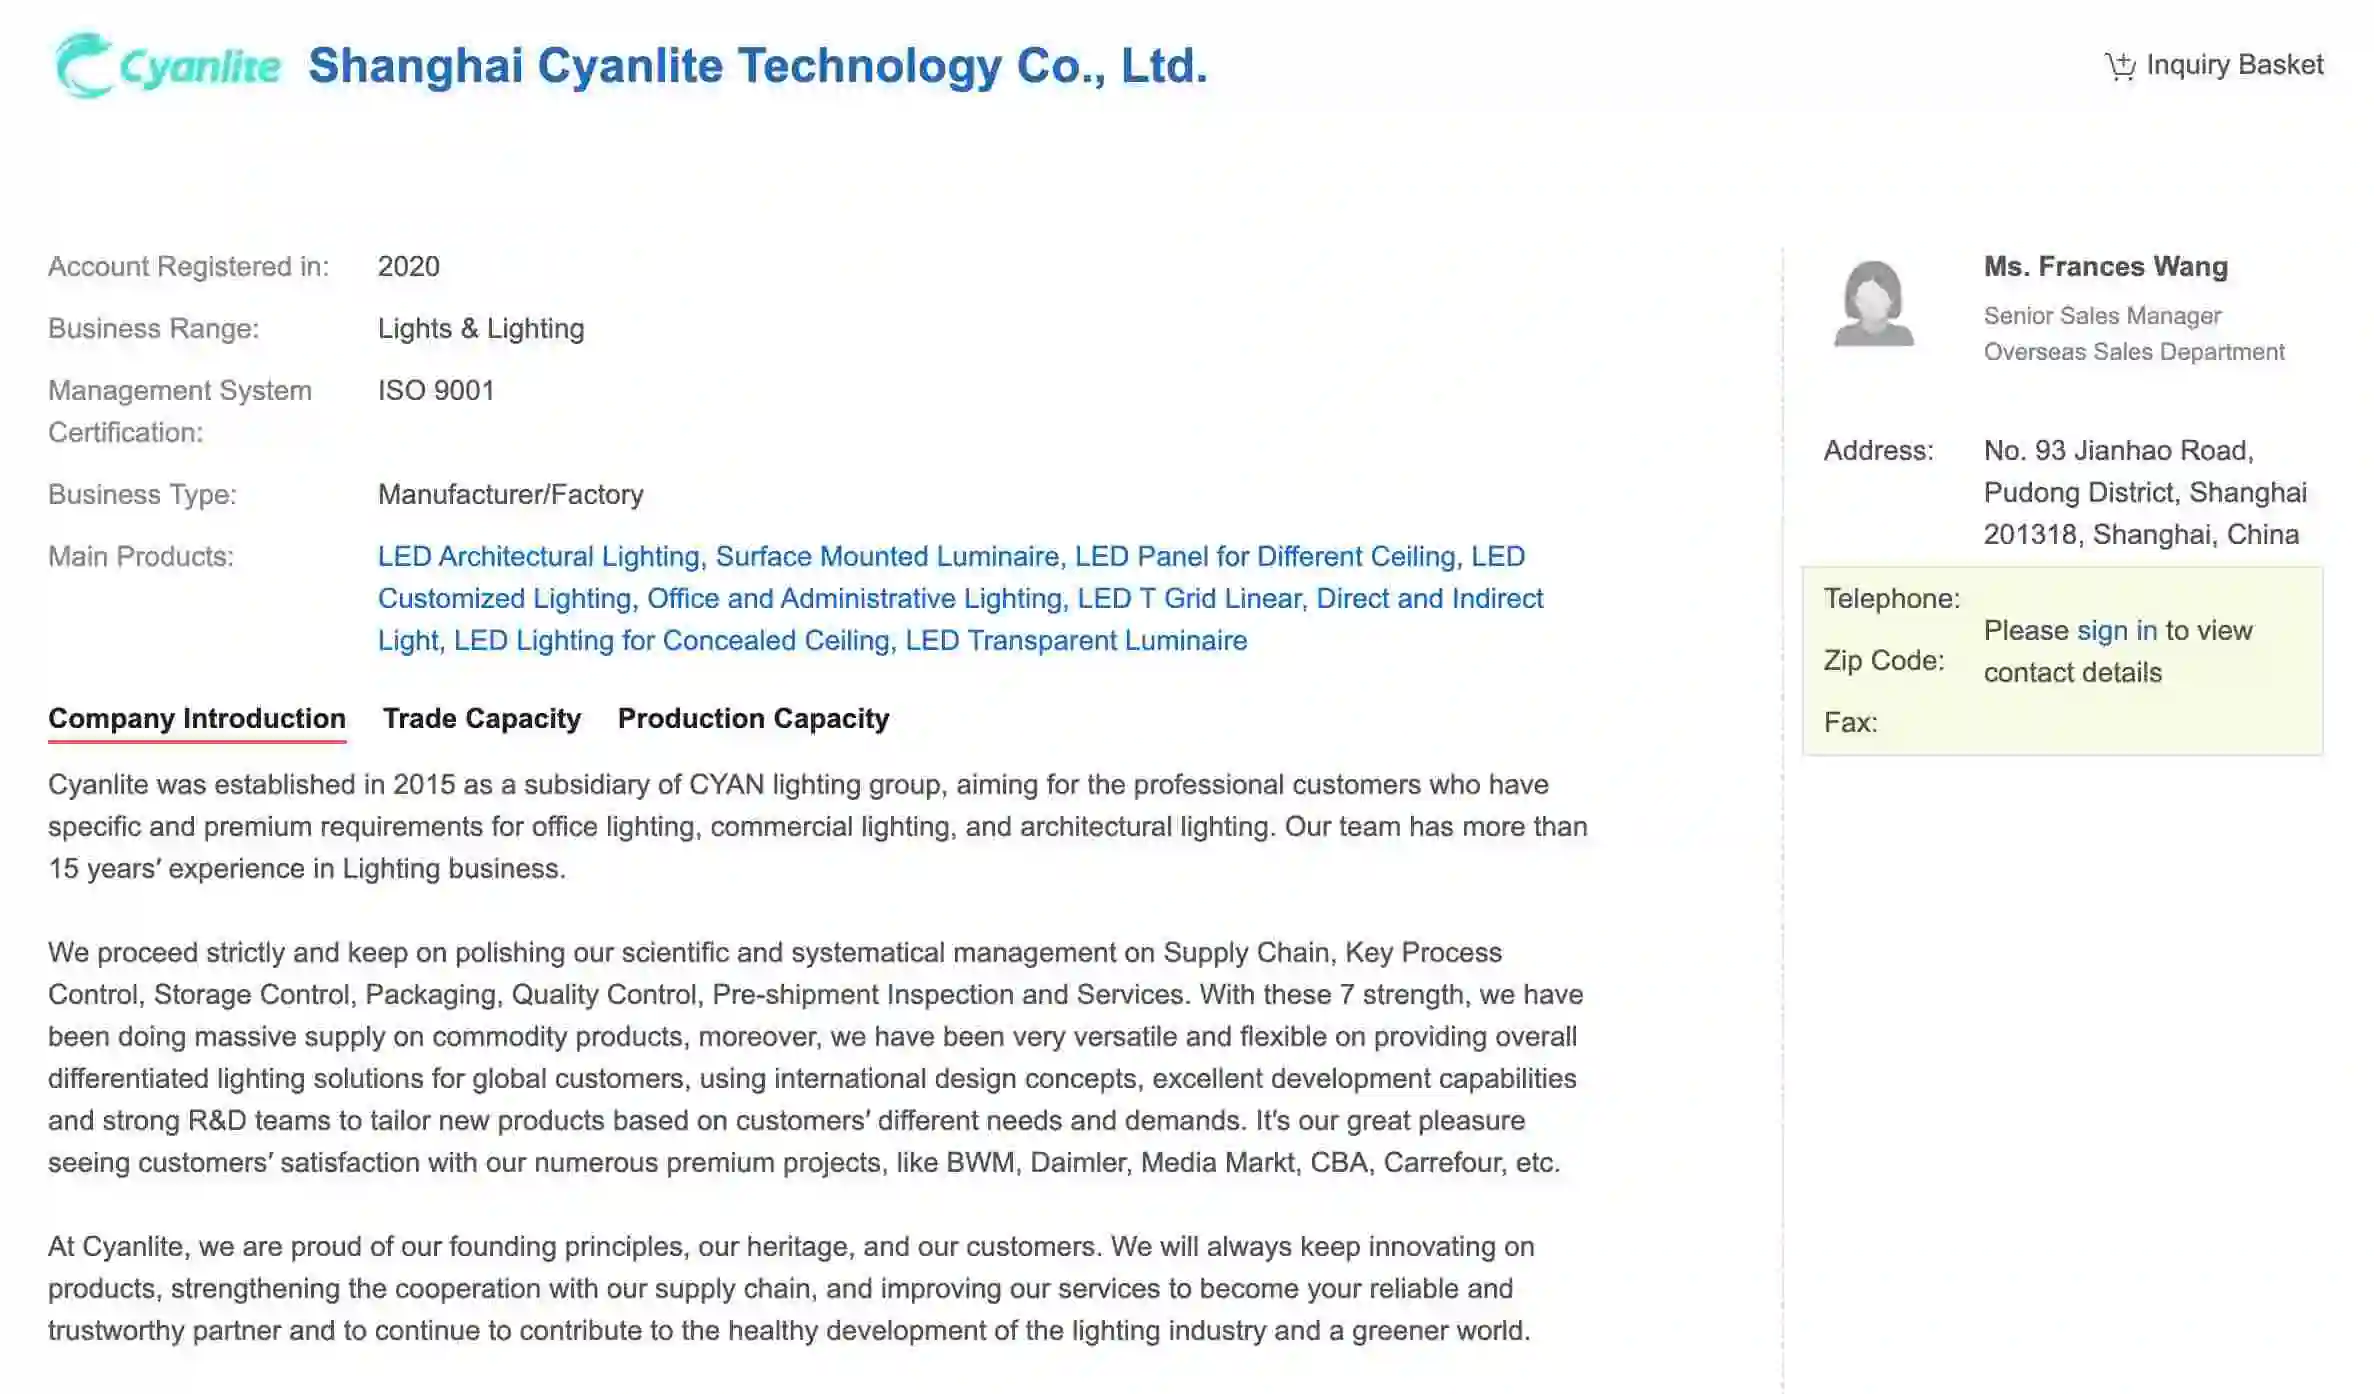 Cyanlite website displaying extensive content and details